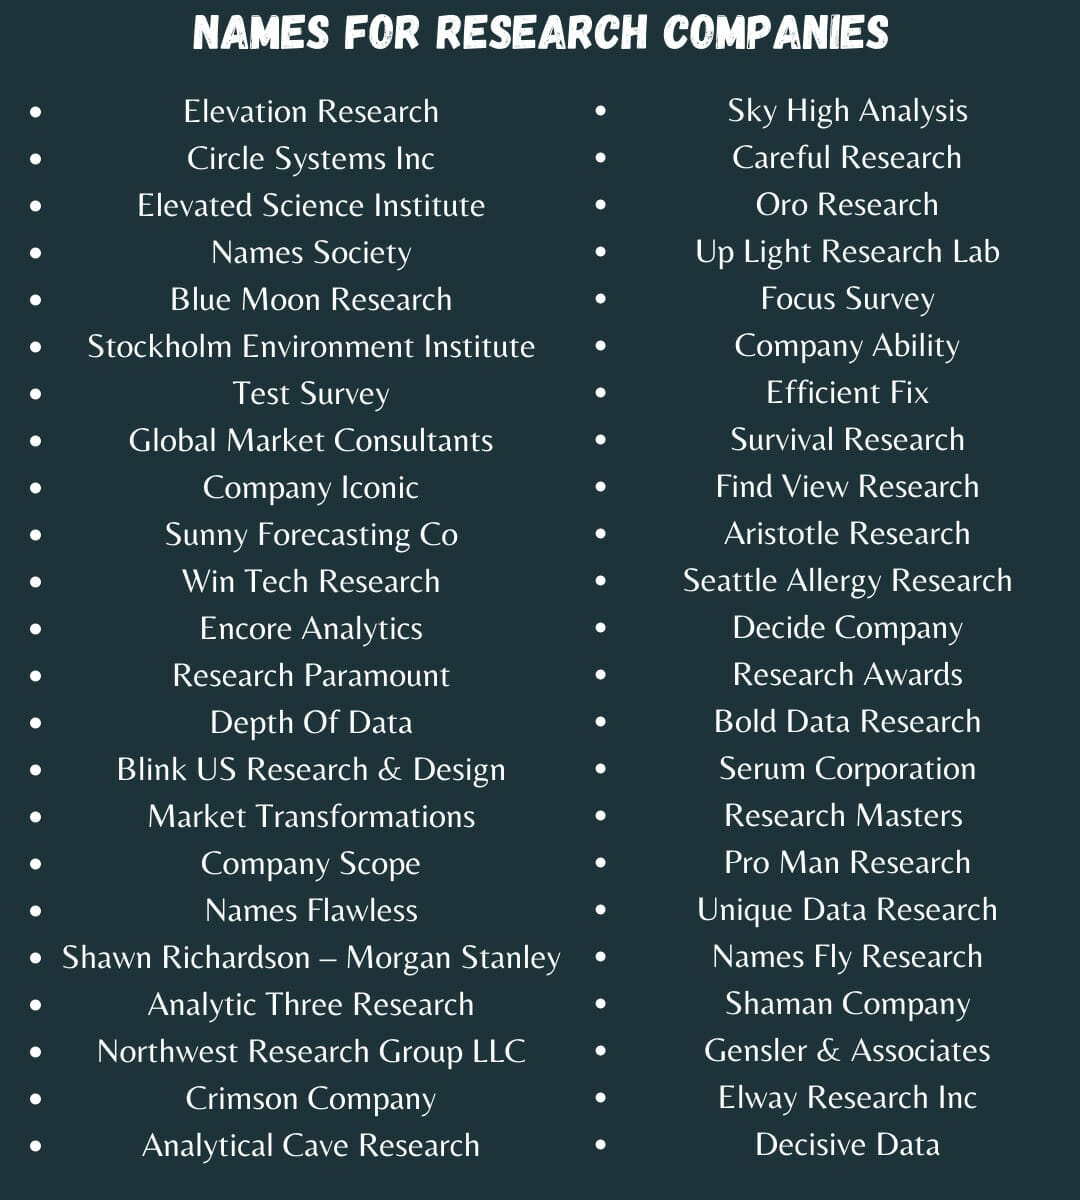 Names For Research Companies